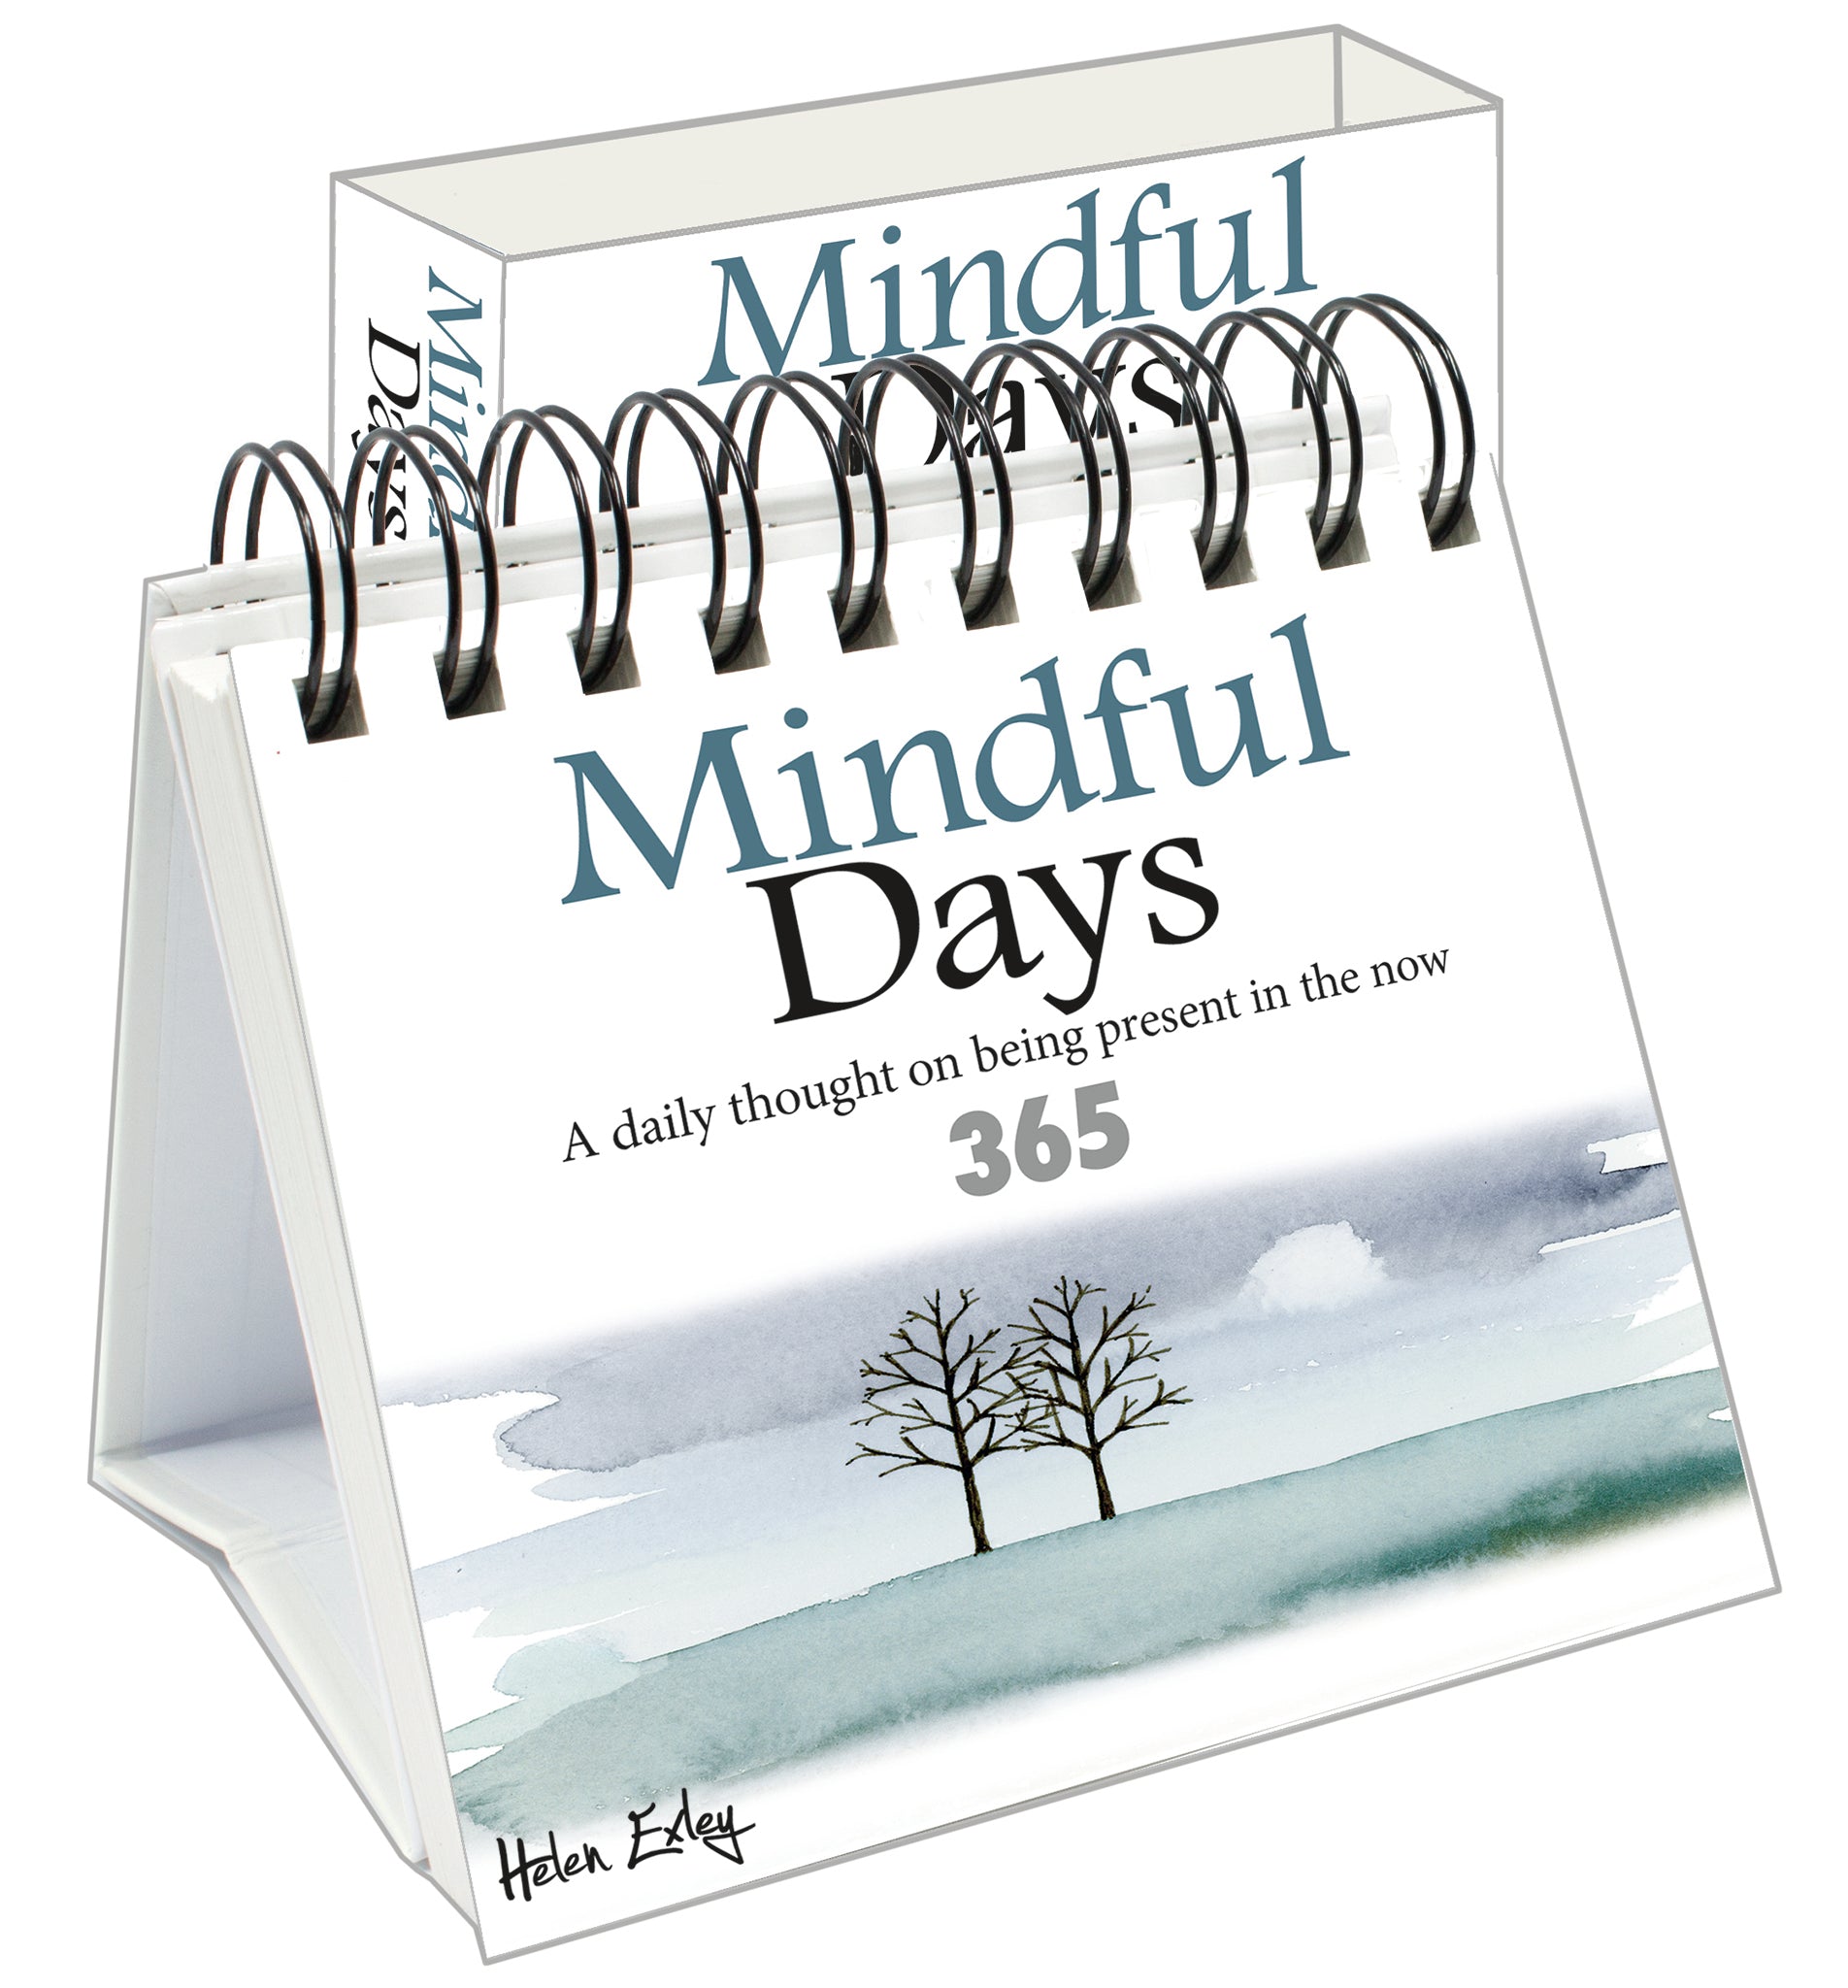 365 Mindful Days - A daily thought on being present in the now